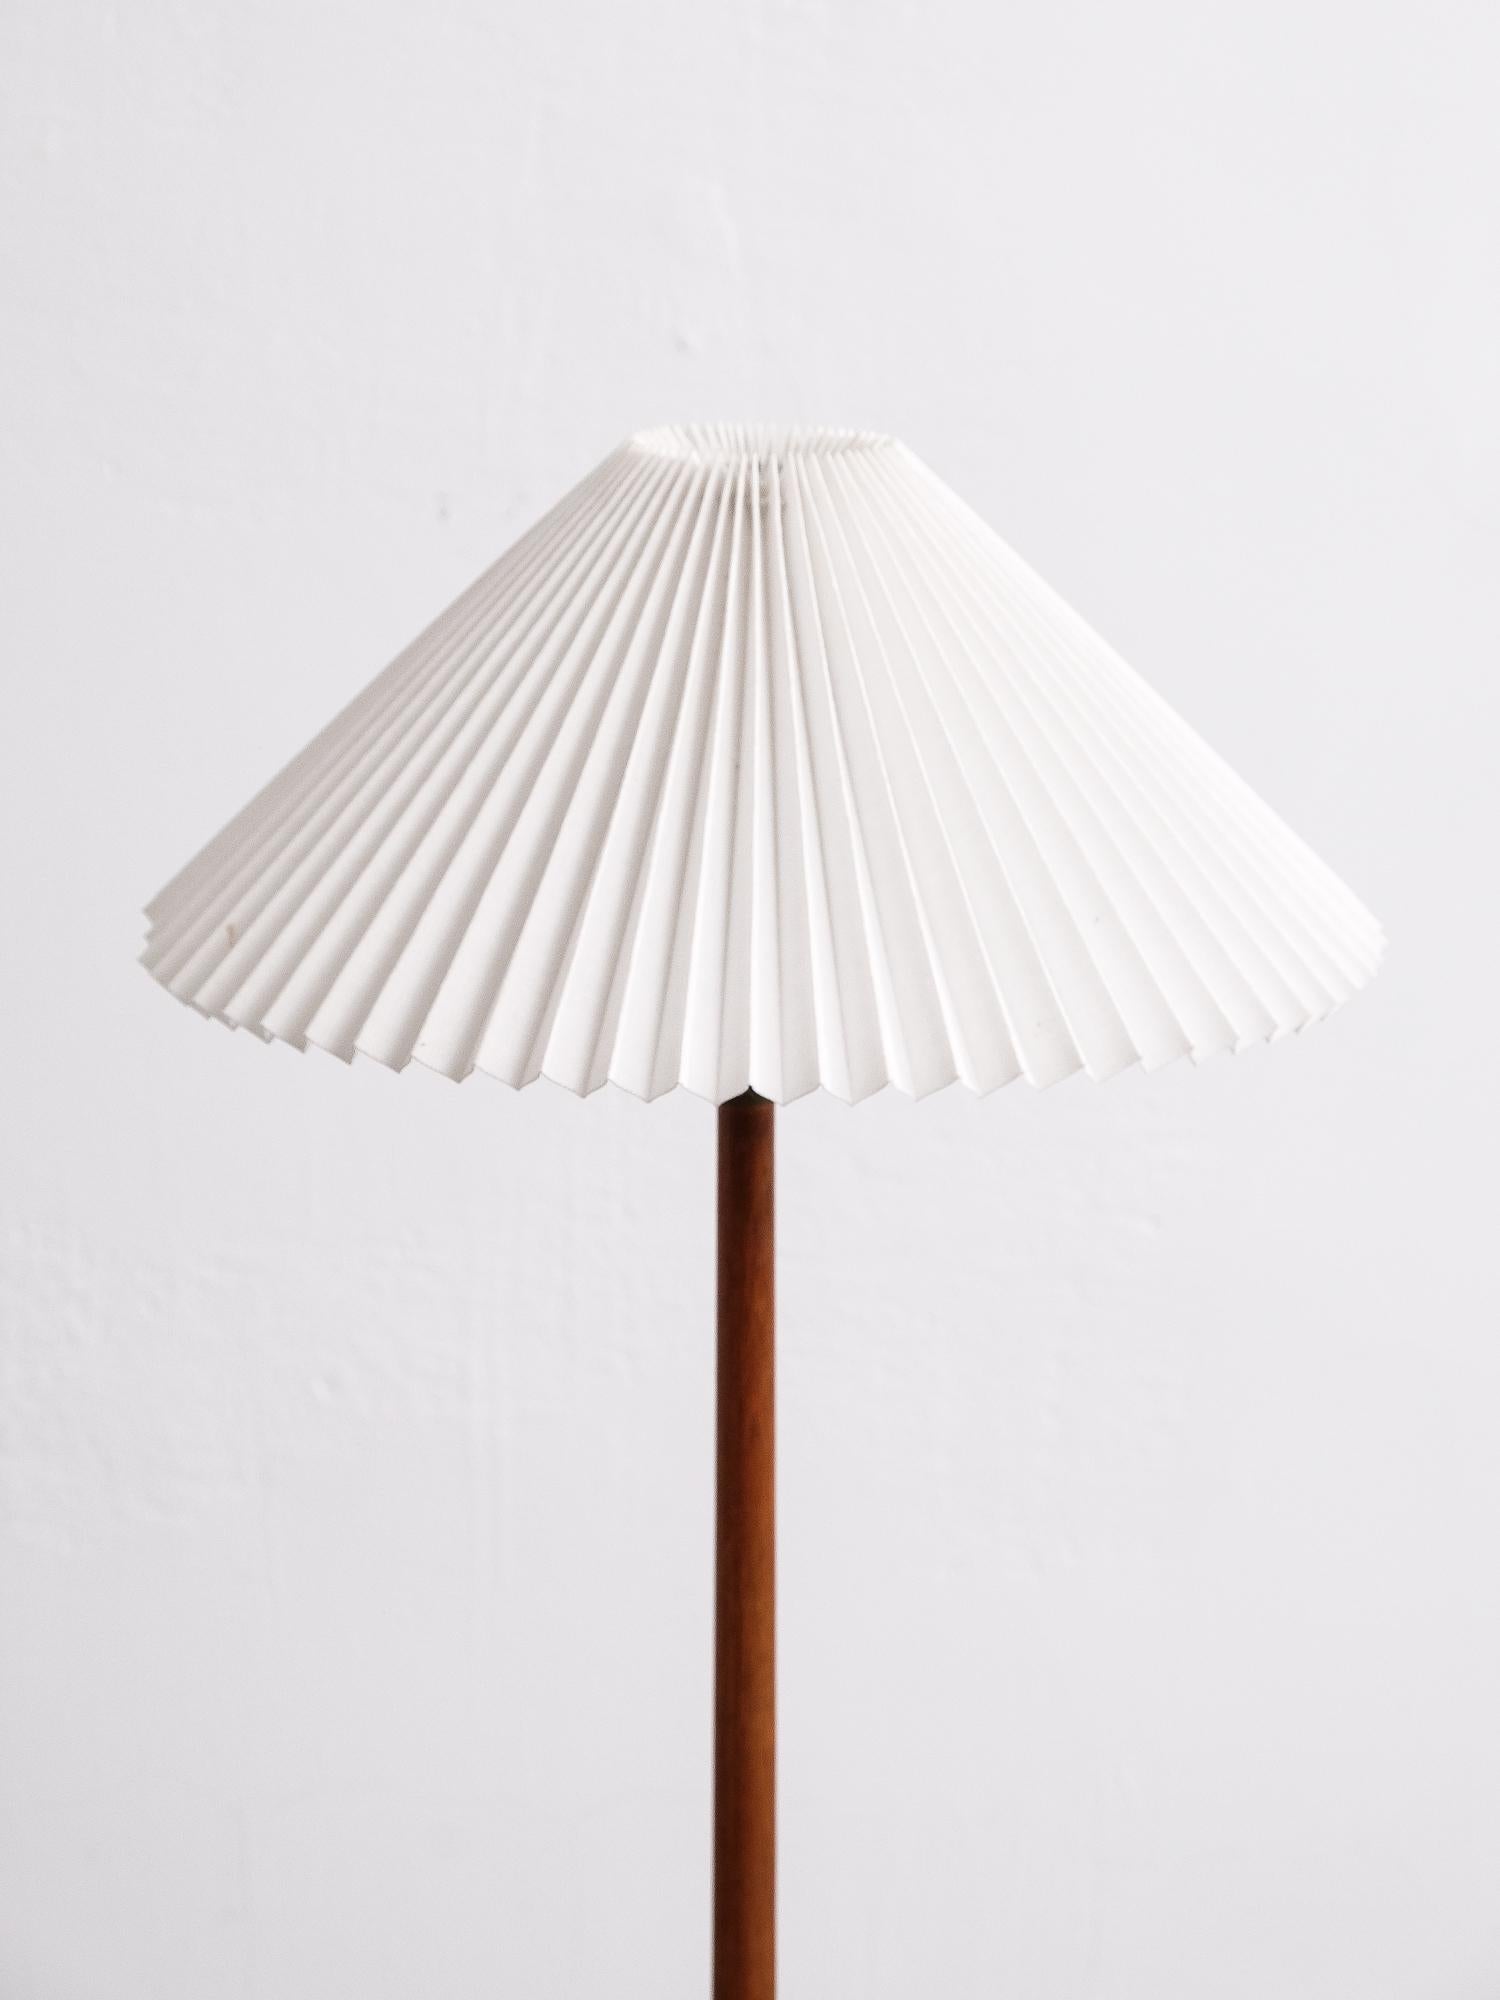 Big floor lamp in oak by Uno & Östen Kristiansson for Luxus.
This lamp is made of solid oak and comes with white pleated lampshade. 

As always with Luxus products, it shows great quality.

Very good original condition. Shade is included, does